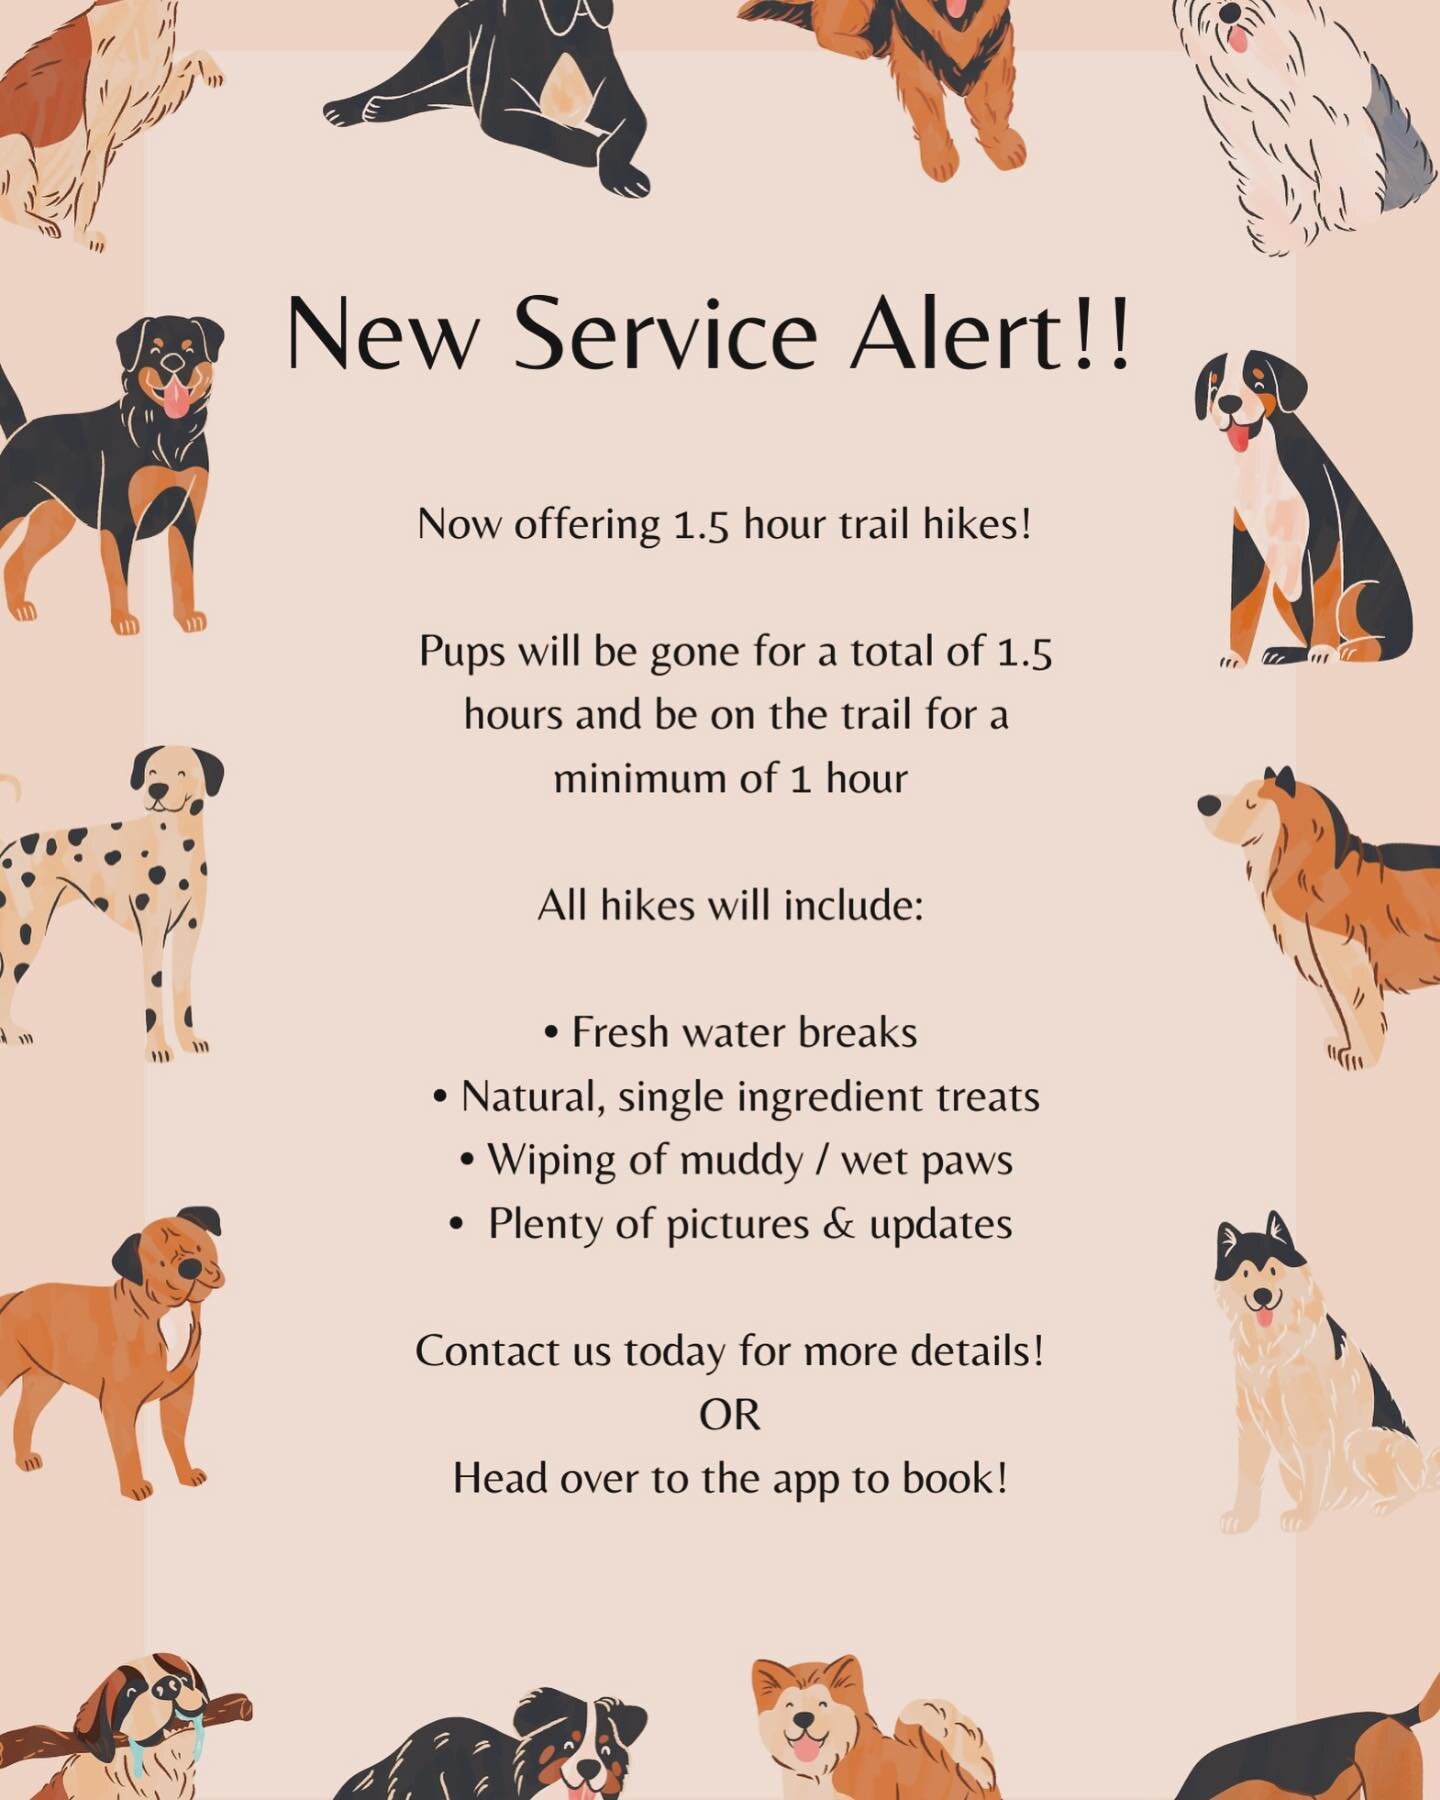 New Service Alert! ♡ Trail hikes are now being offered ! 𖠰

#oshawadogs #whitbydogs #oshawadogwalking #whitbydogwalking #doghikes #ajaxdogwalker #oshawapetsitting #lovemyjob #dogwalkersofinstagram #petsittersofinstagram #oshawasmallbuisness